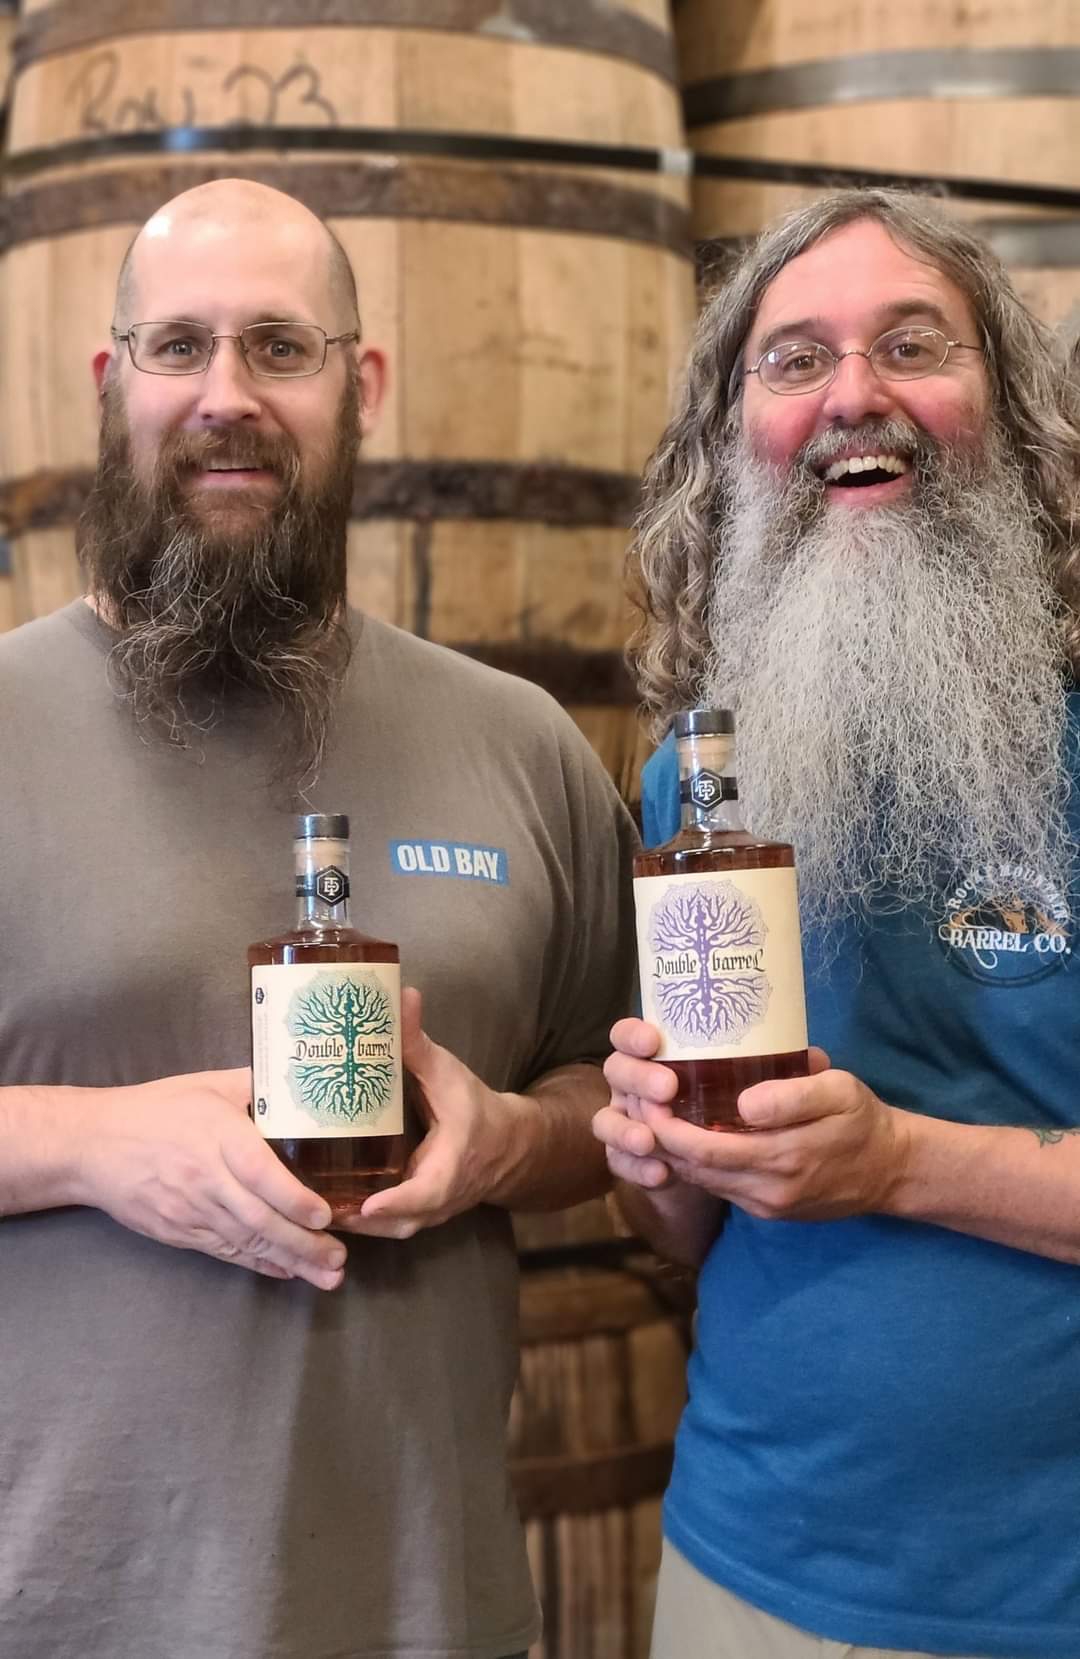 Andrew "Skippy" Steiger, left, and Brandon Moore hold bottles of Ty Iechyd Da spirits as they stand in the distillery's barrel room.